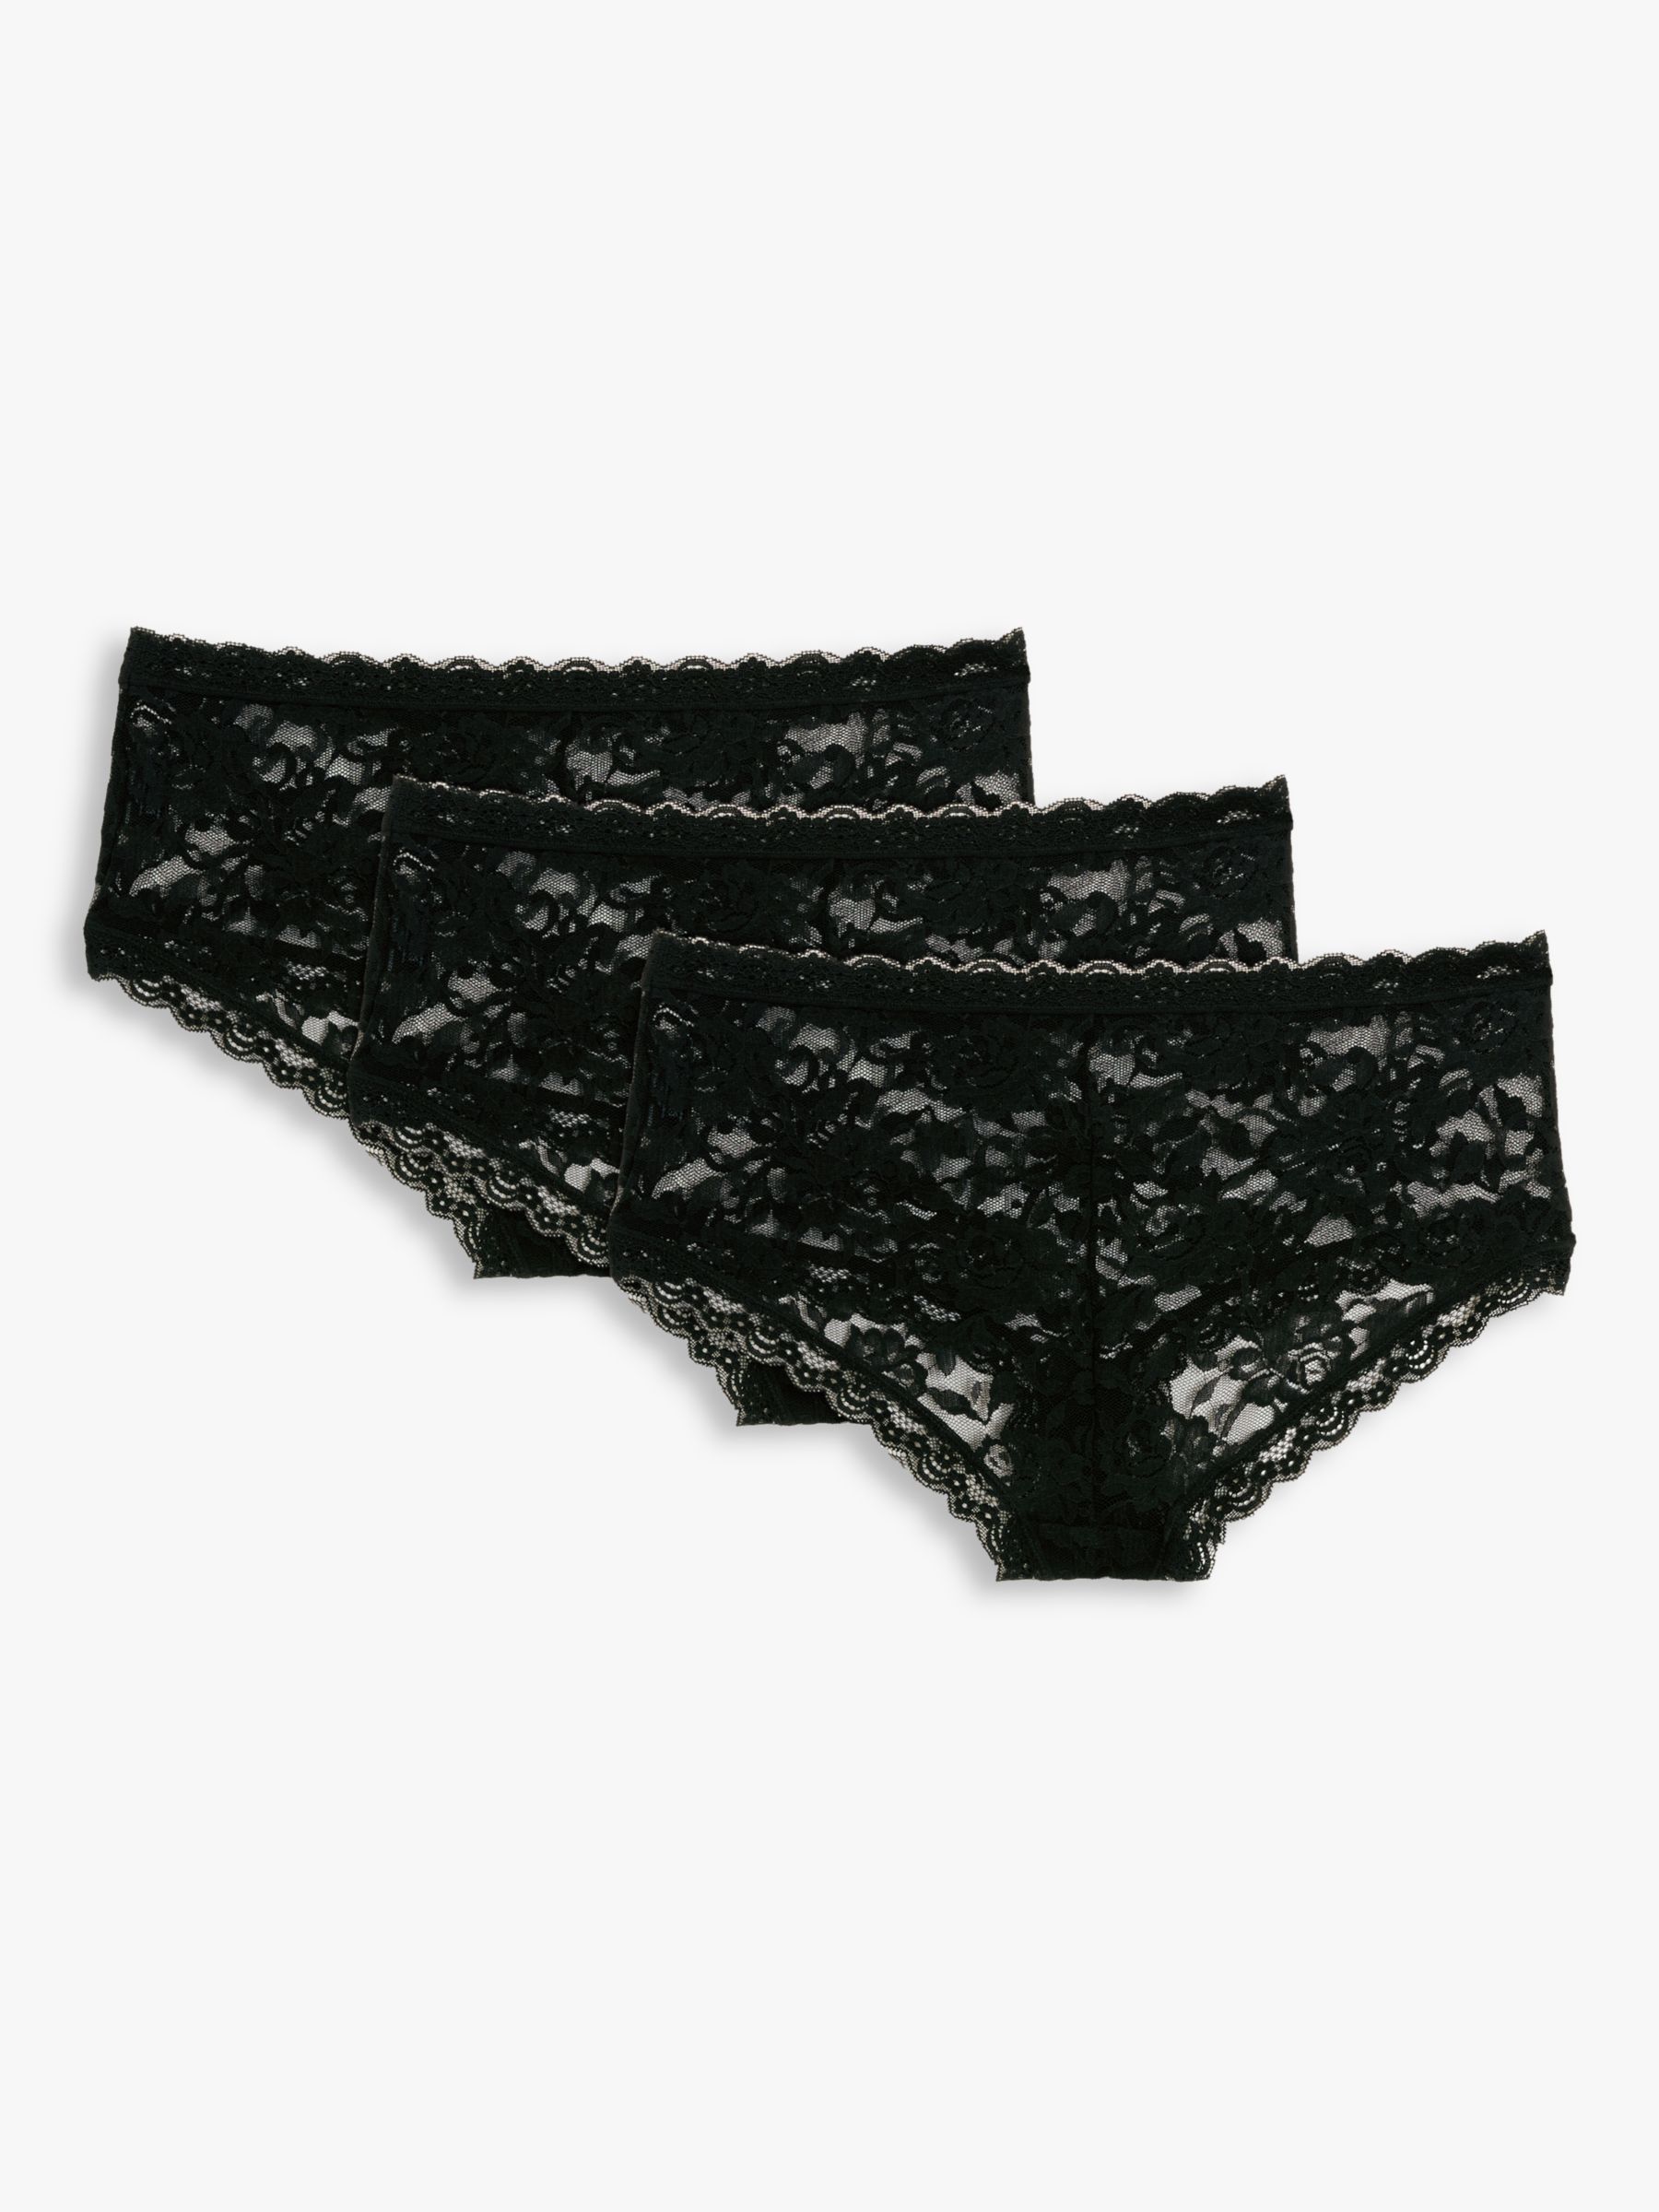 Buy Monochrome Midi Cotton and Lace Knickers 4 Pack from Next USA